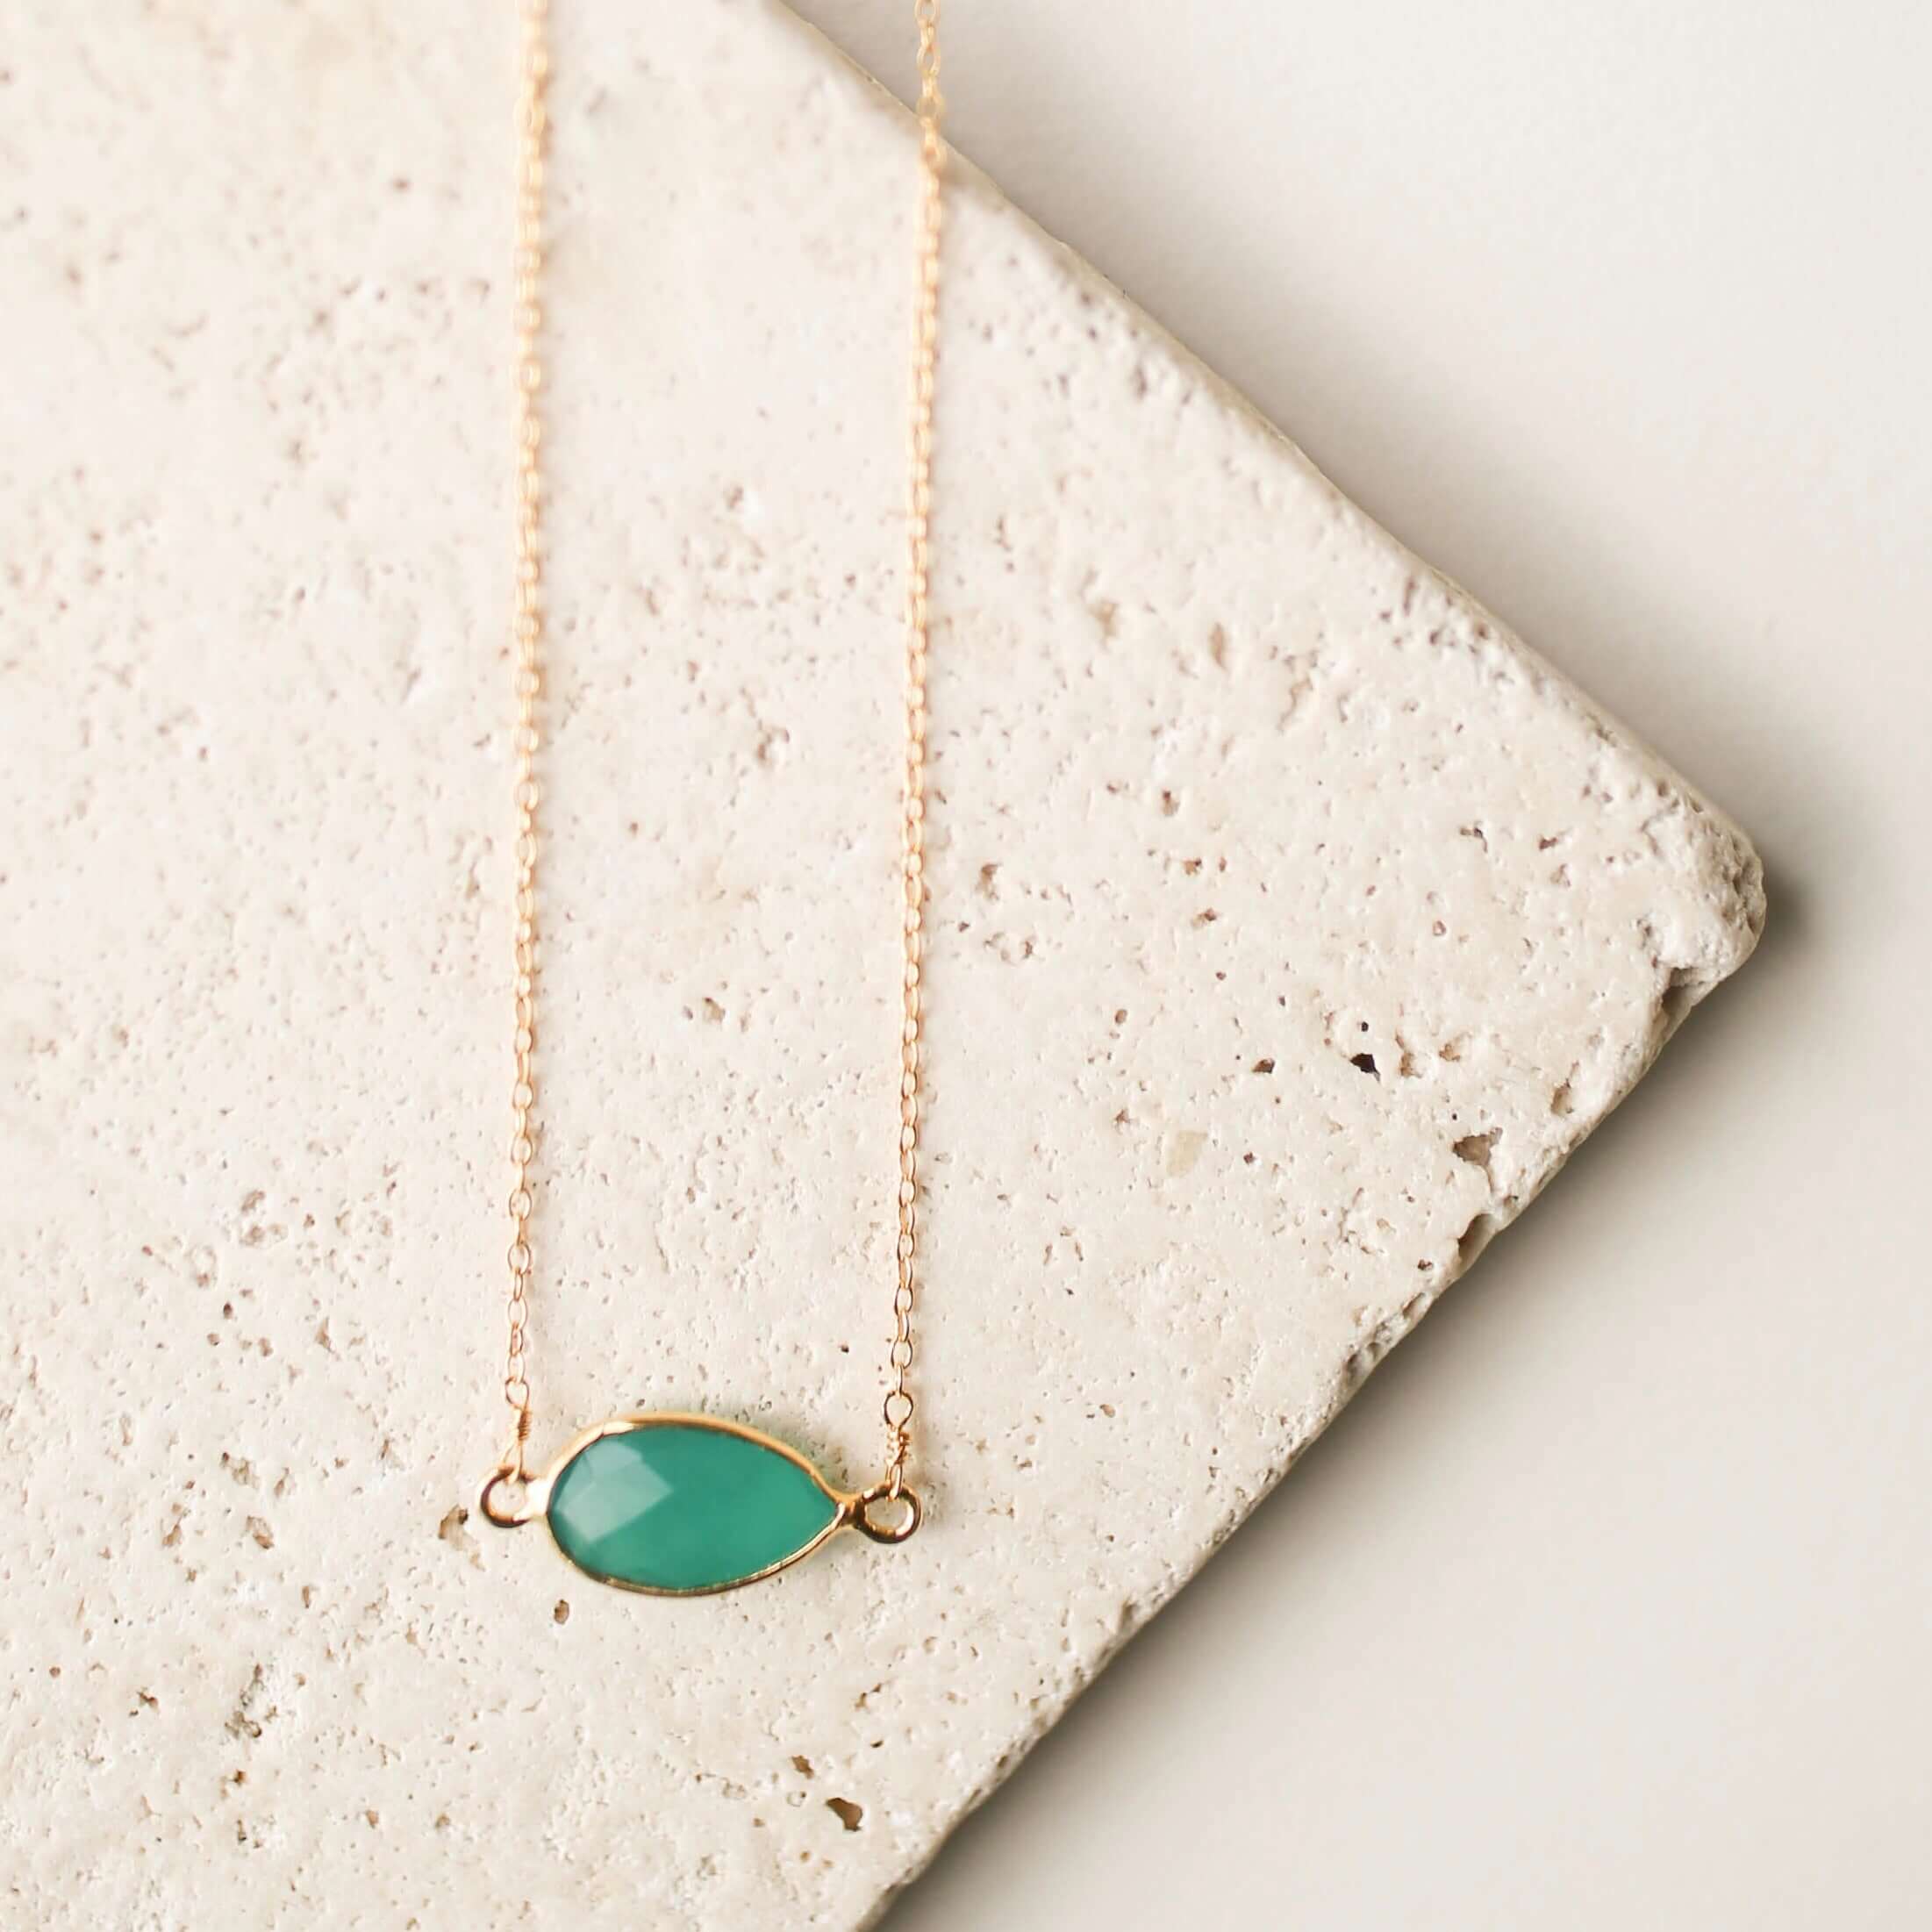 Minimalist Gold Necklace Featuring a Green Apatite Stone